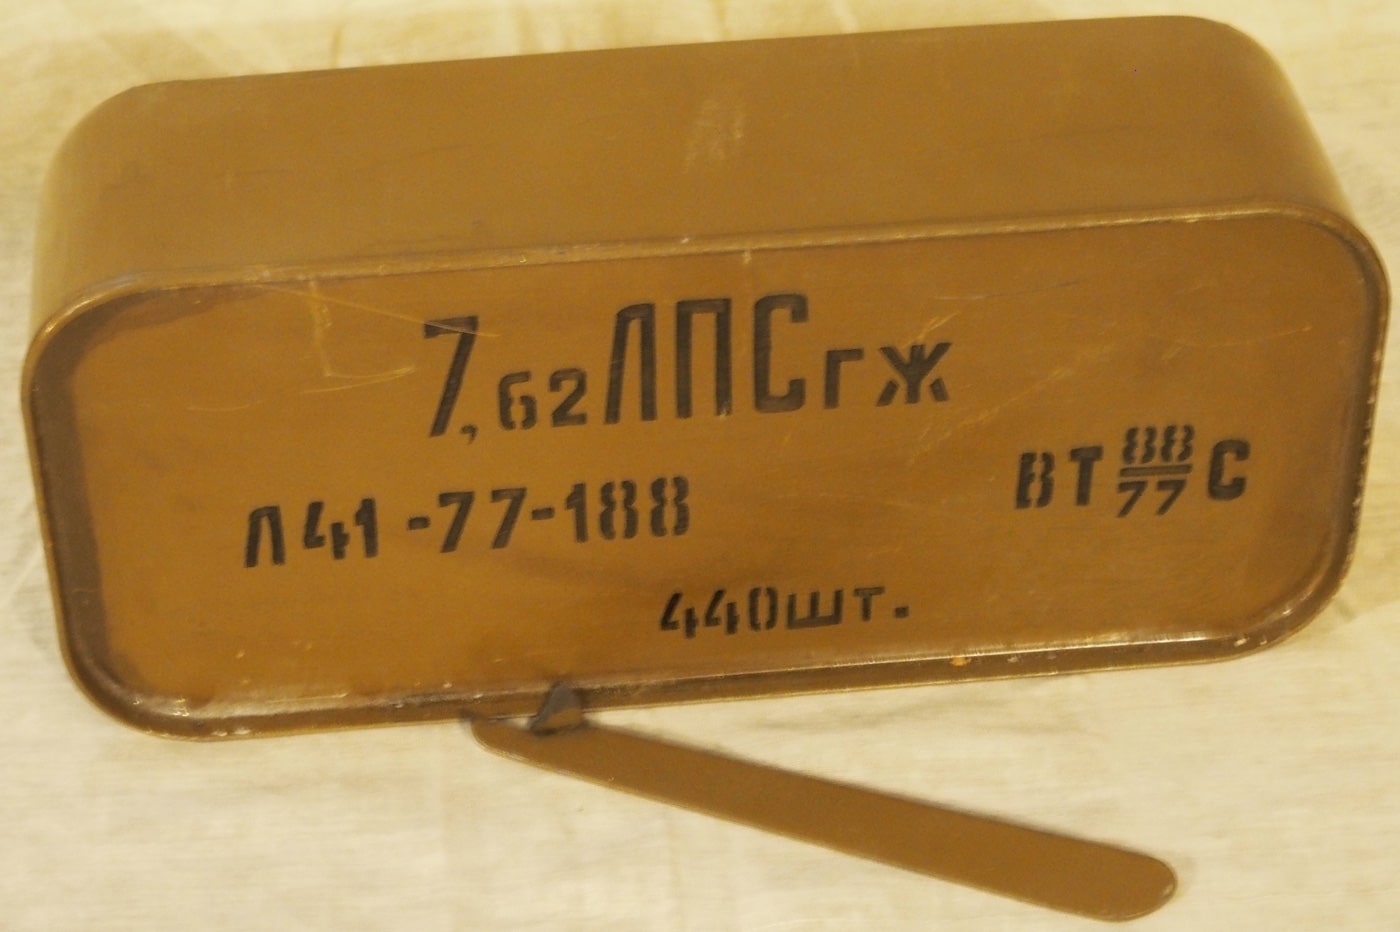 Shown in this digital photograph is a sealed surplus ammunition container with Russian writing on it. It holds 440 rounds of 7.62x39 ammunition for long term storage.